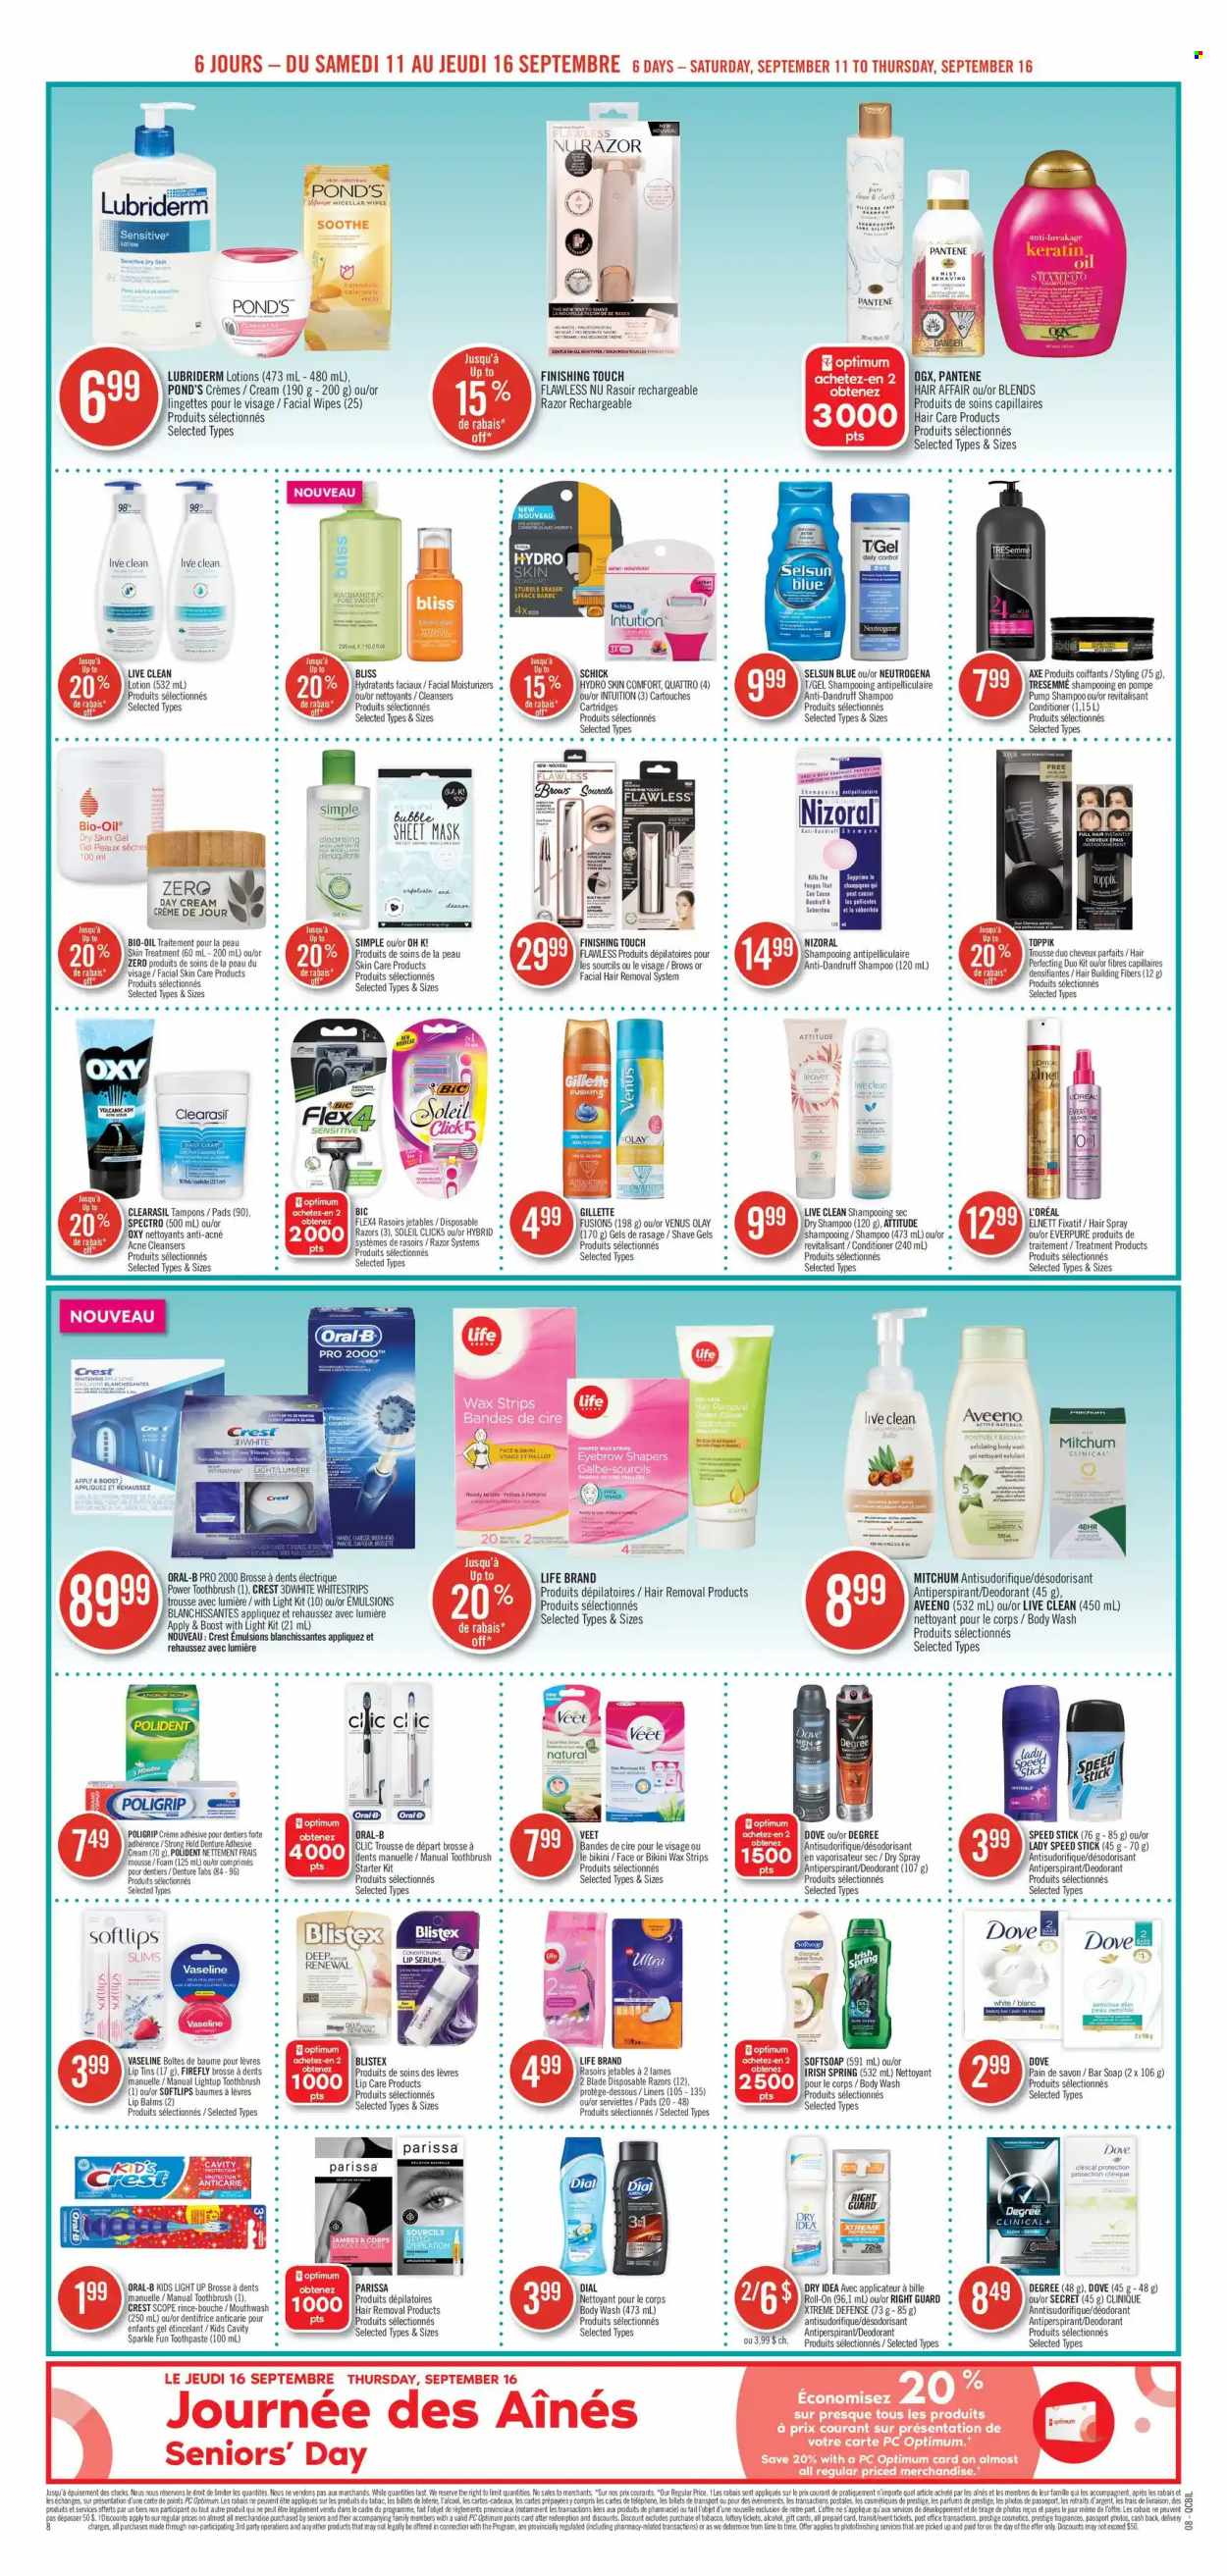 thumbnail - Pharmaprix Flyer - September 11, 2021 - September 16, 2021 - Sales products - Ace, oil, Boost, wipes, Aveeno, Vanish, body wash, Softsoap, Vaseline, soap bar, POND'S, Dial, soap, toothbrush, toothpaste, mouthwash, Polident, Crest, tampons, Clinique, day cream, L’Oréal, moisturizer, serum, Olay, OGX, conditioner, TRESemmé, keratin, Toppik, body lotion, Lubriderm, anti-perspirant, roll-on, Speed Stick, BIC, razor, Schick, Venus, hair removal, Veet, wax strips, disposable razor, eraser, pump, Dove, Gillette, Neutrogena, shampoo, Pantene, Oral-B, deodorant. Page 10.